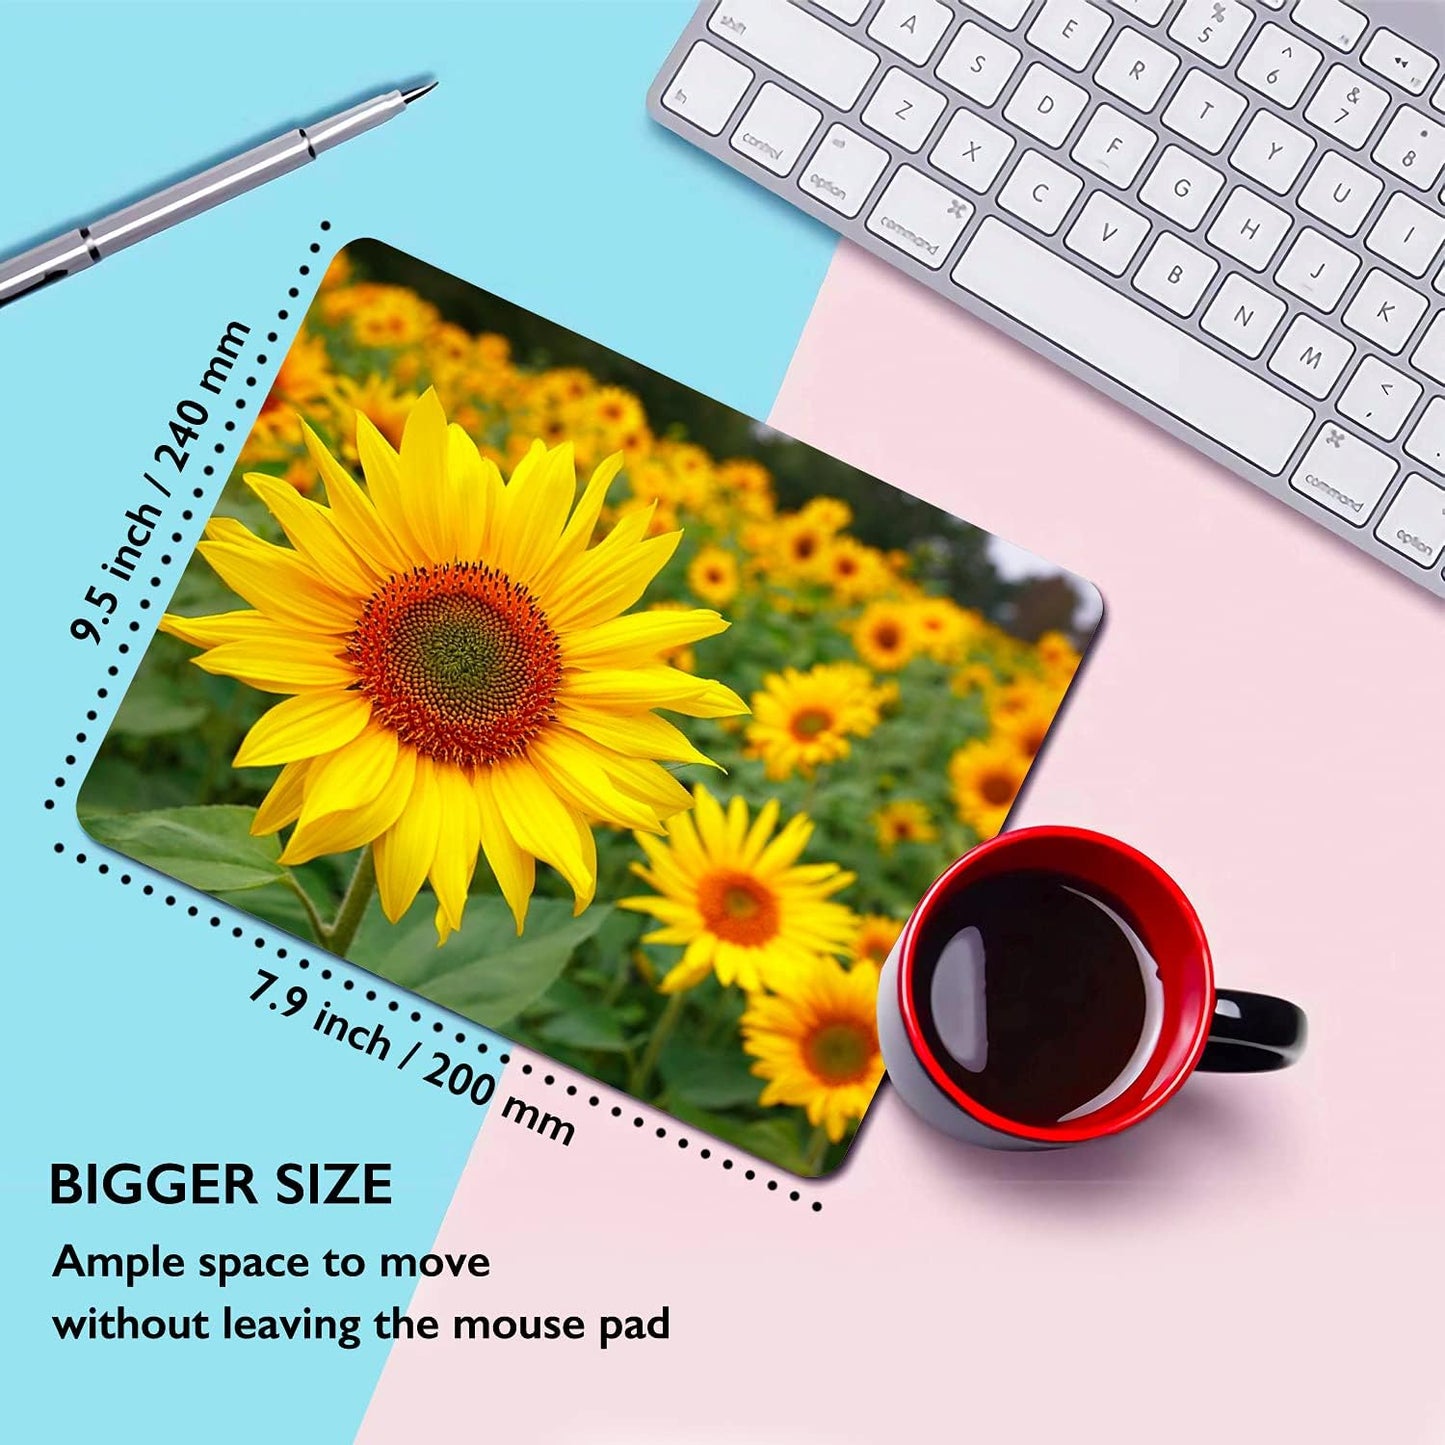 Wood pretty sunflowers mouse pad, of 9.5x7.9x0.12 inches